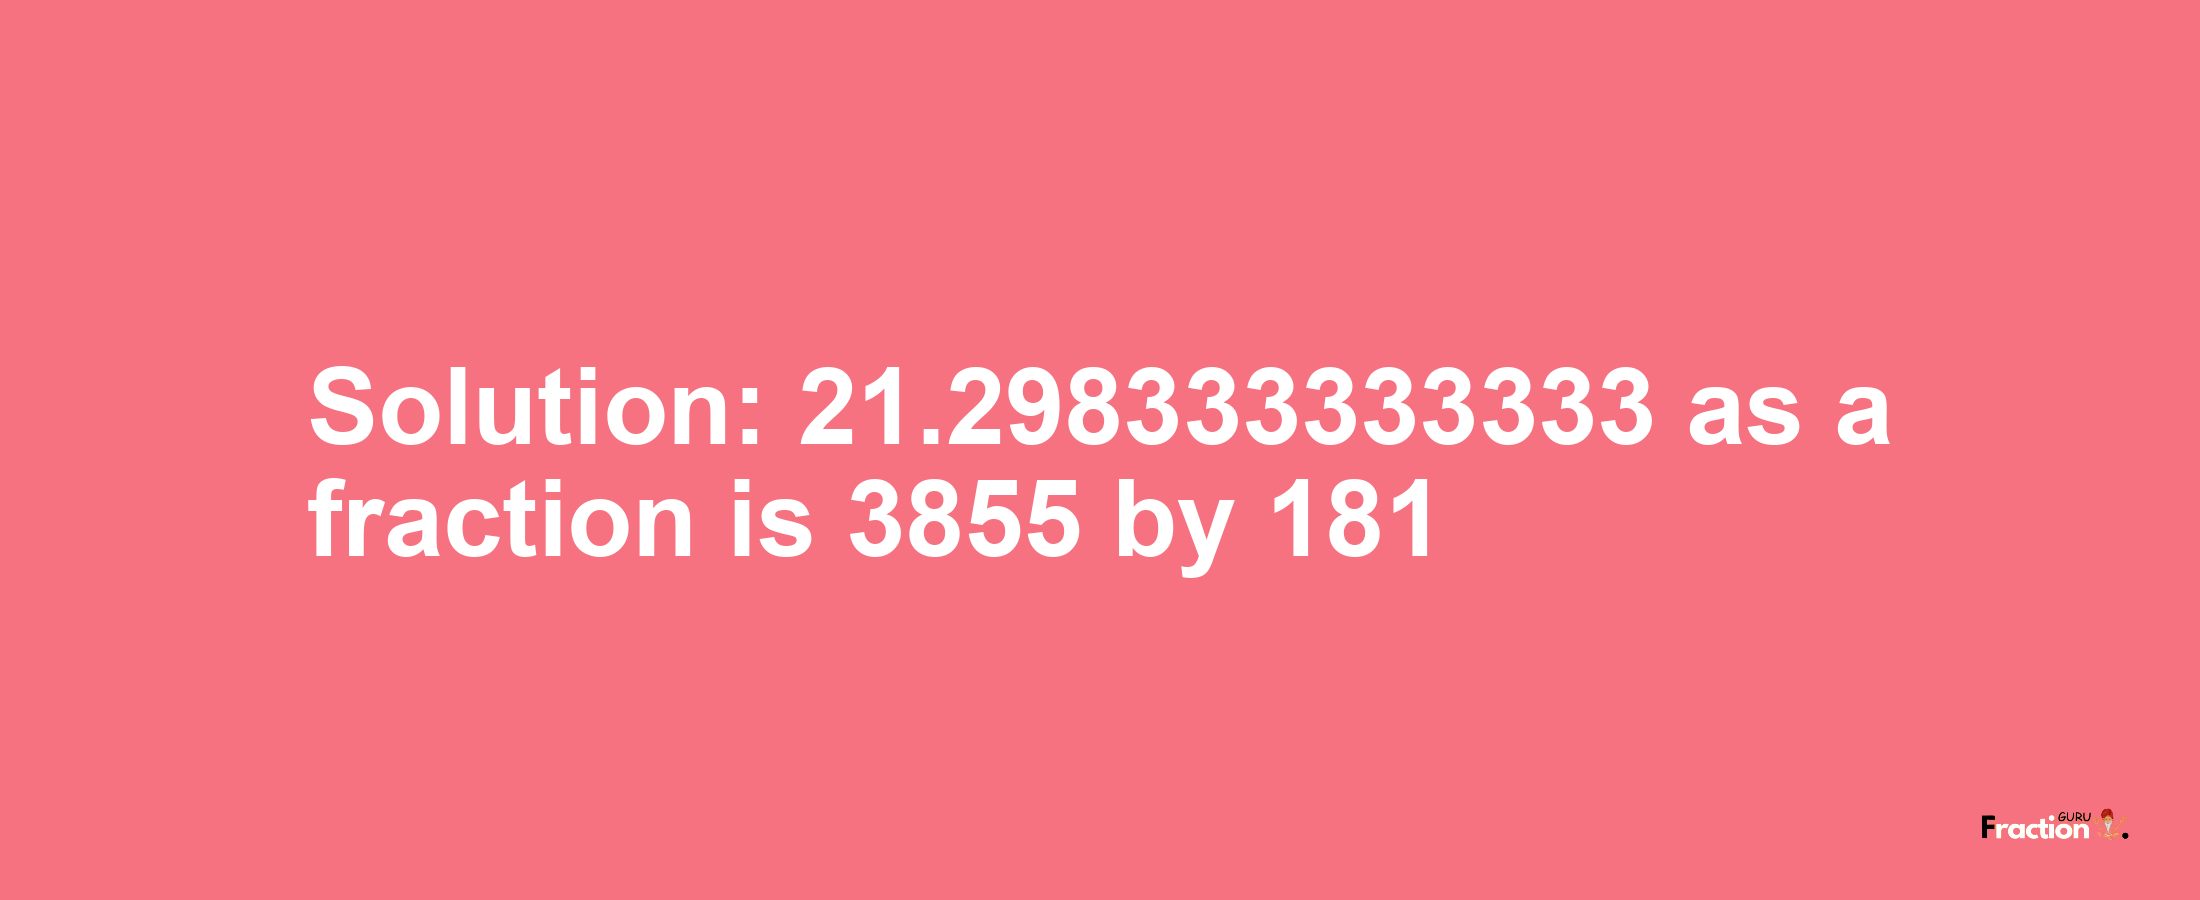 Solution:21.298333333333 as a fraction is 3855/181